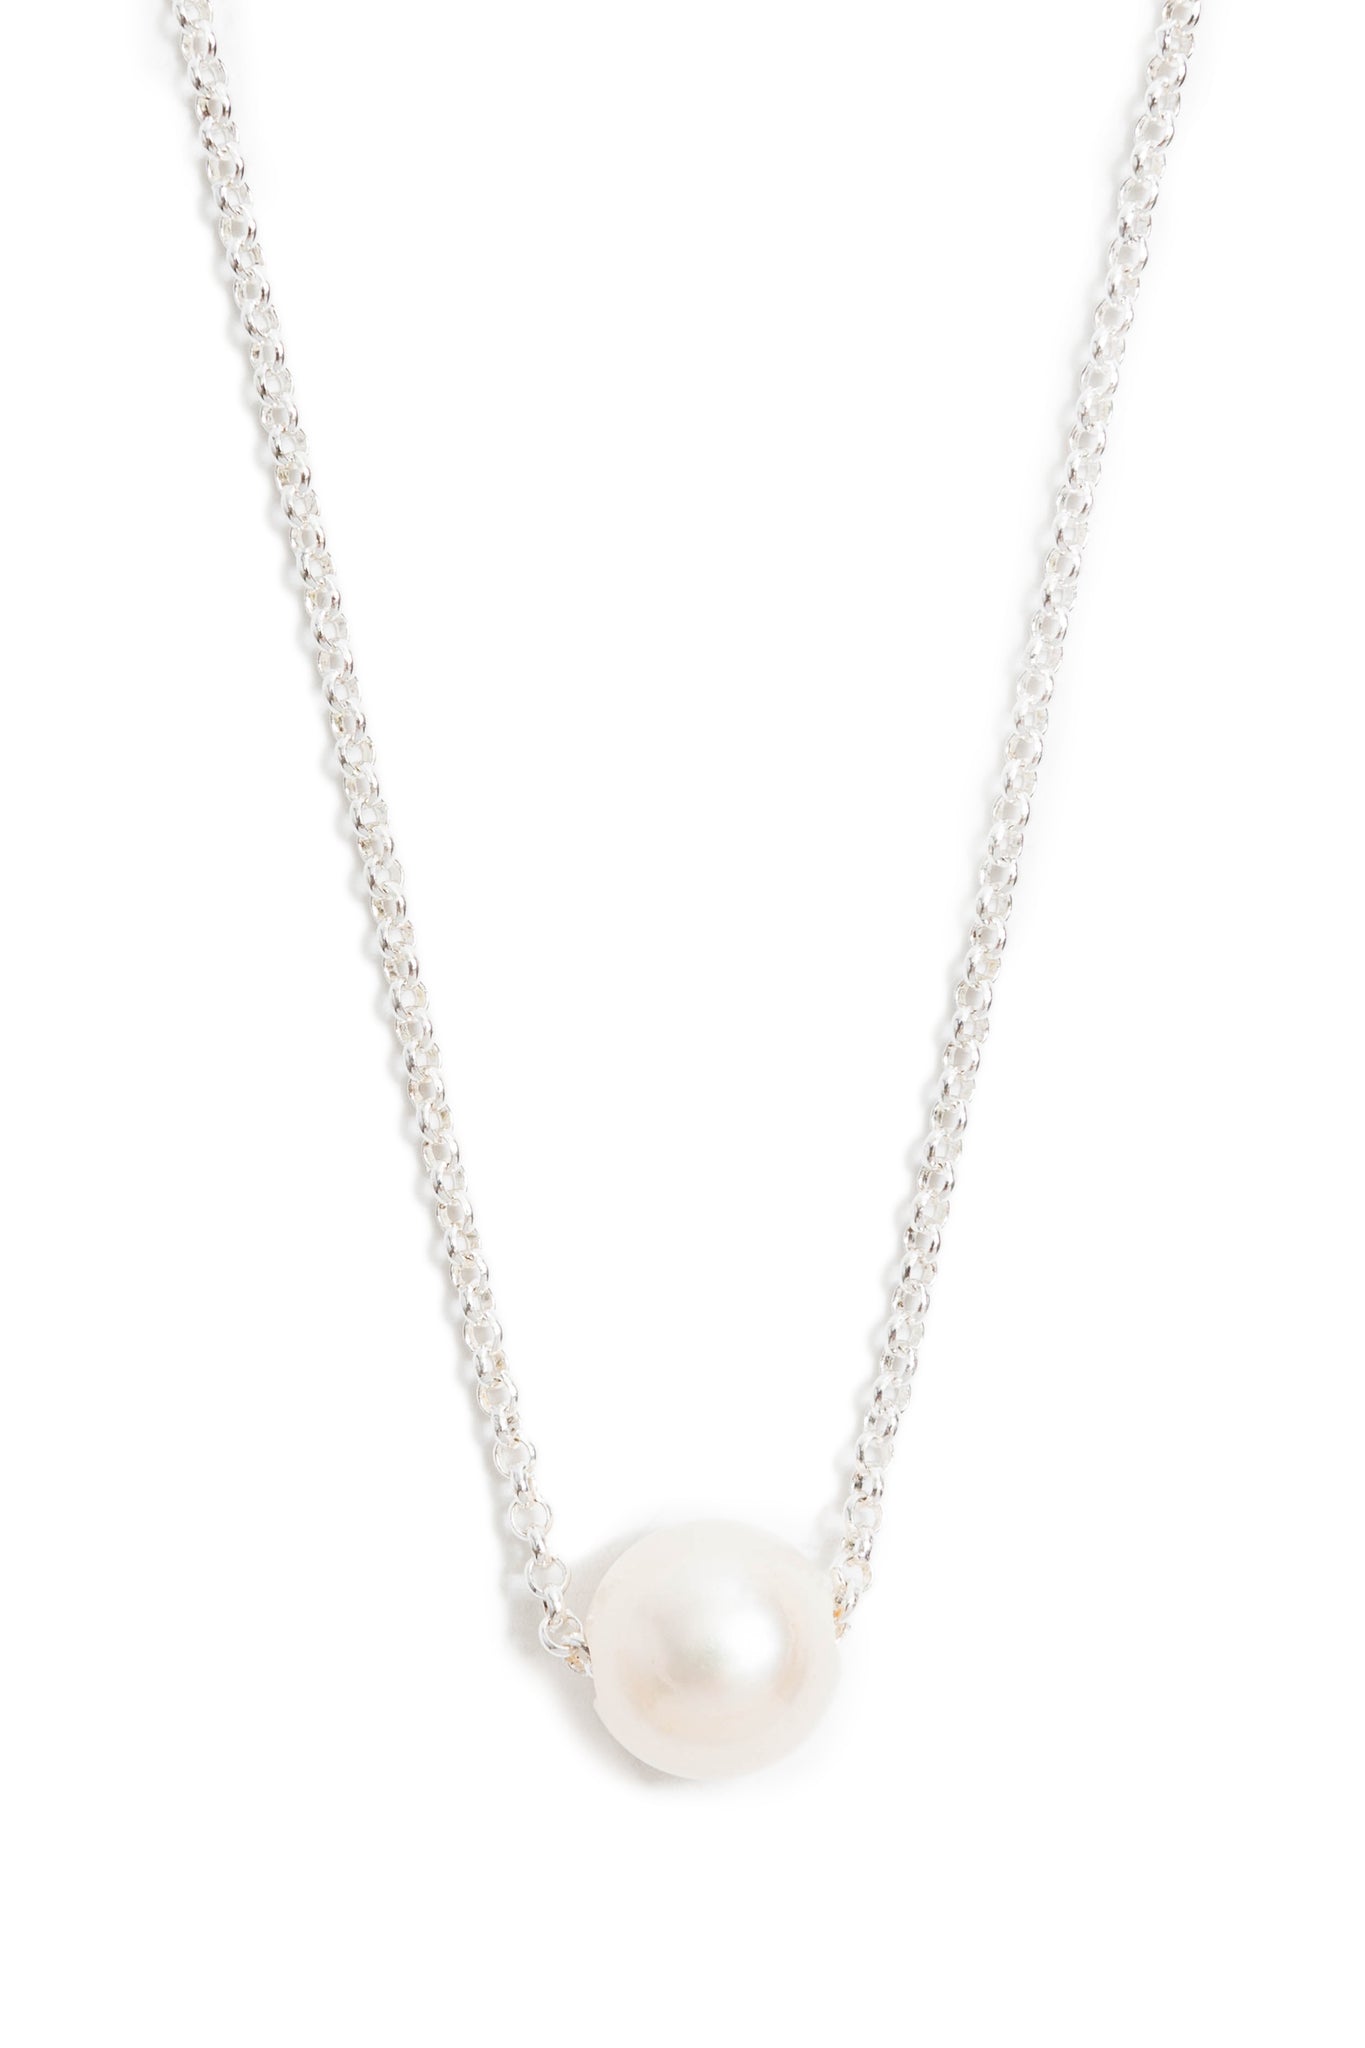 Freshwater Pearl Necklace on Silver Chain